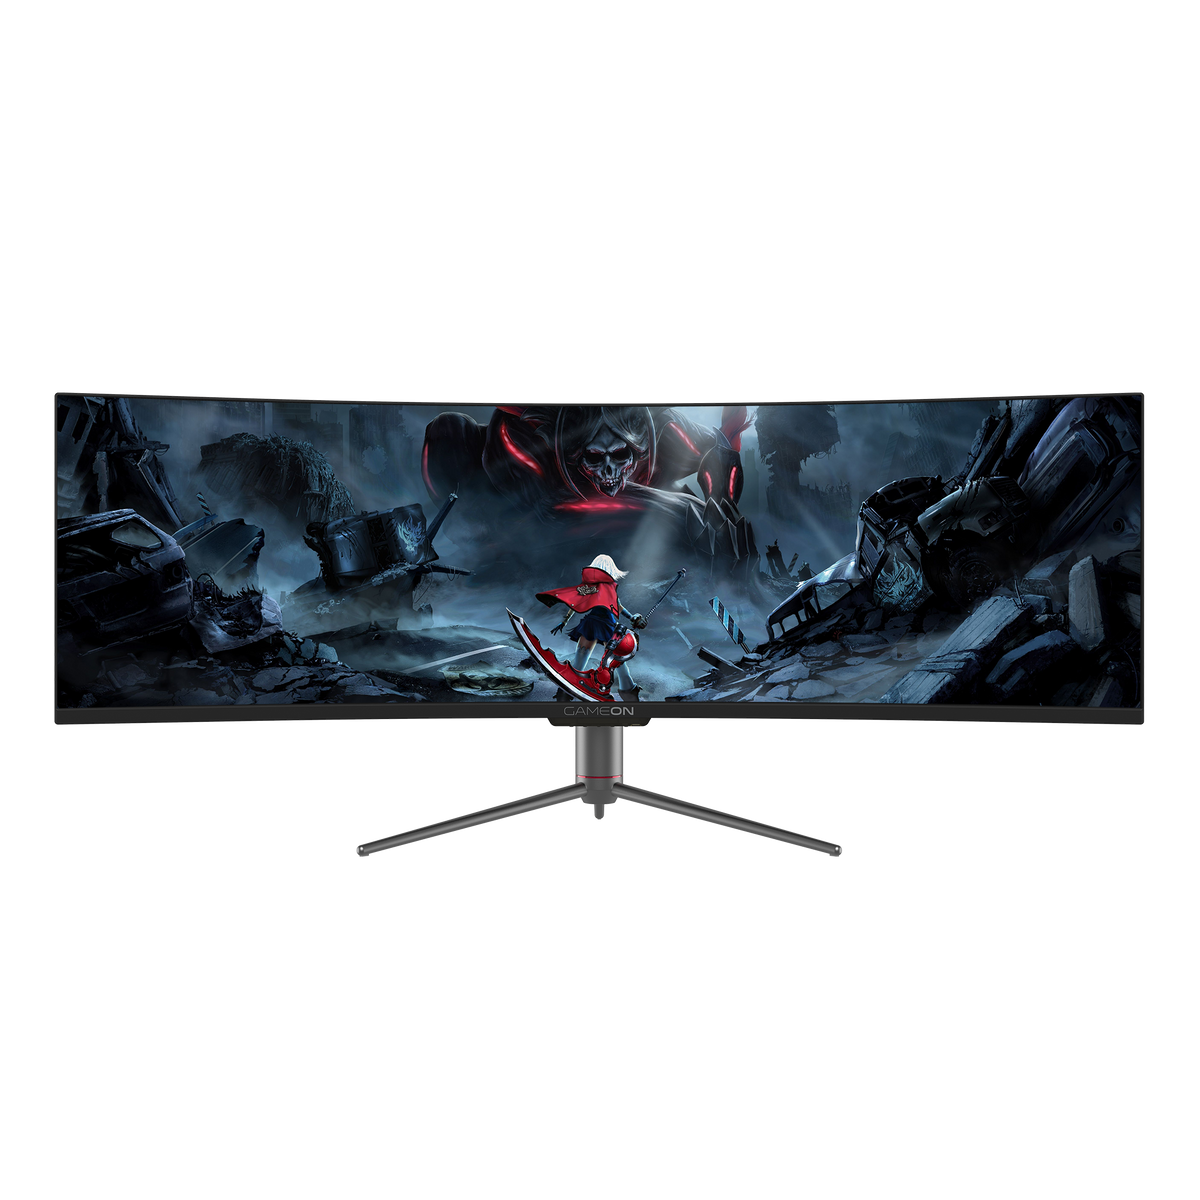 GAMEON 49" 5K UHD, 120Hz, 12ms (5120x1440) Curved VA Gaming Monitor With Free Sync